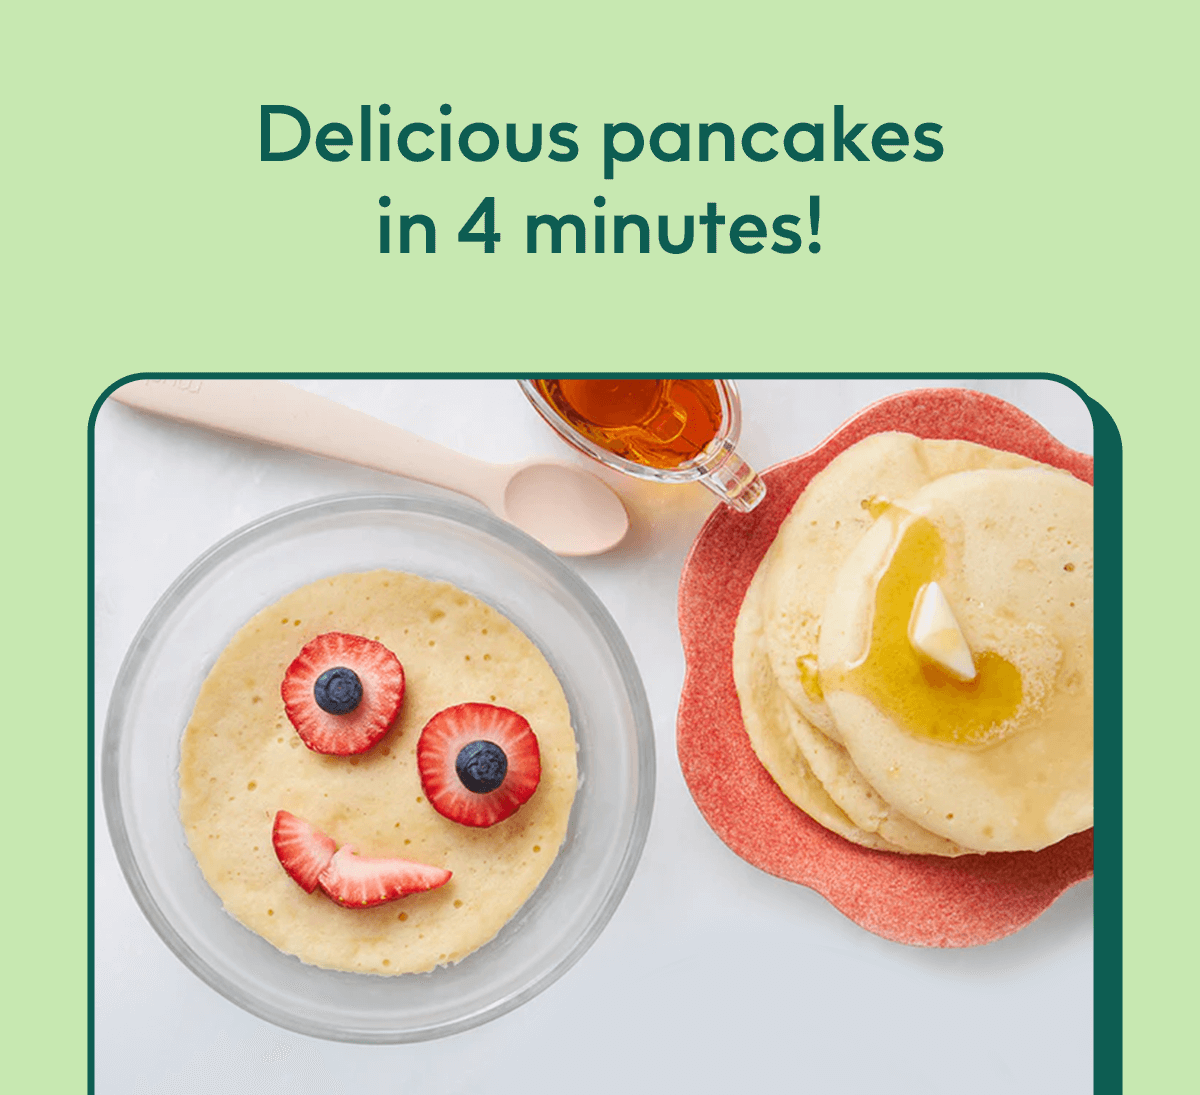 Delicious pancakes in 4 minutes!